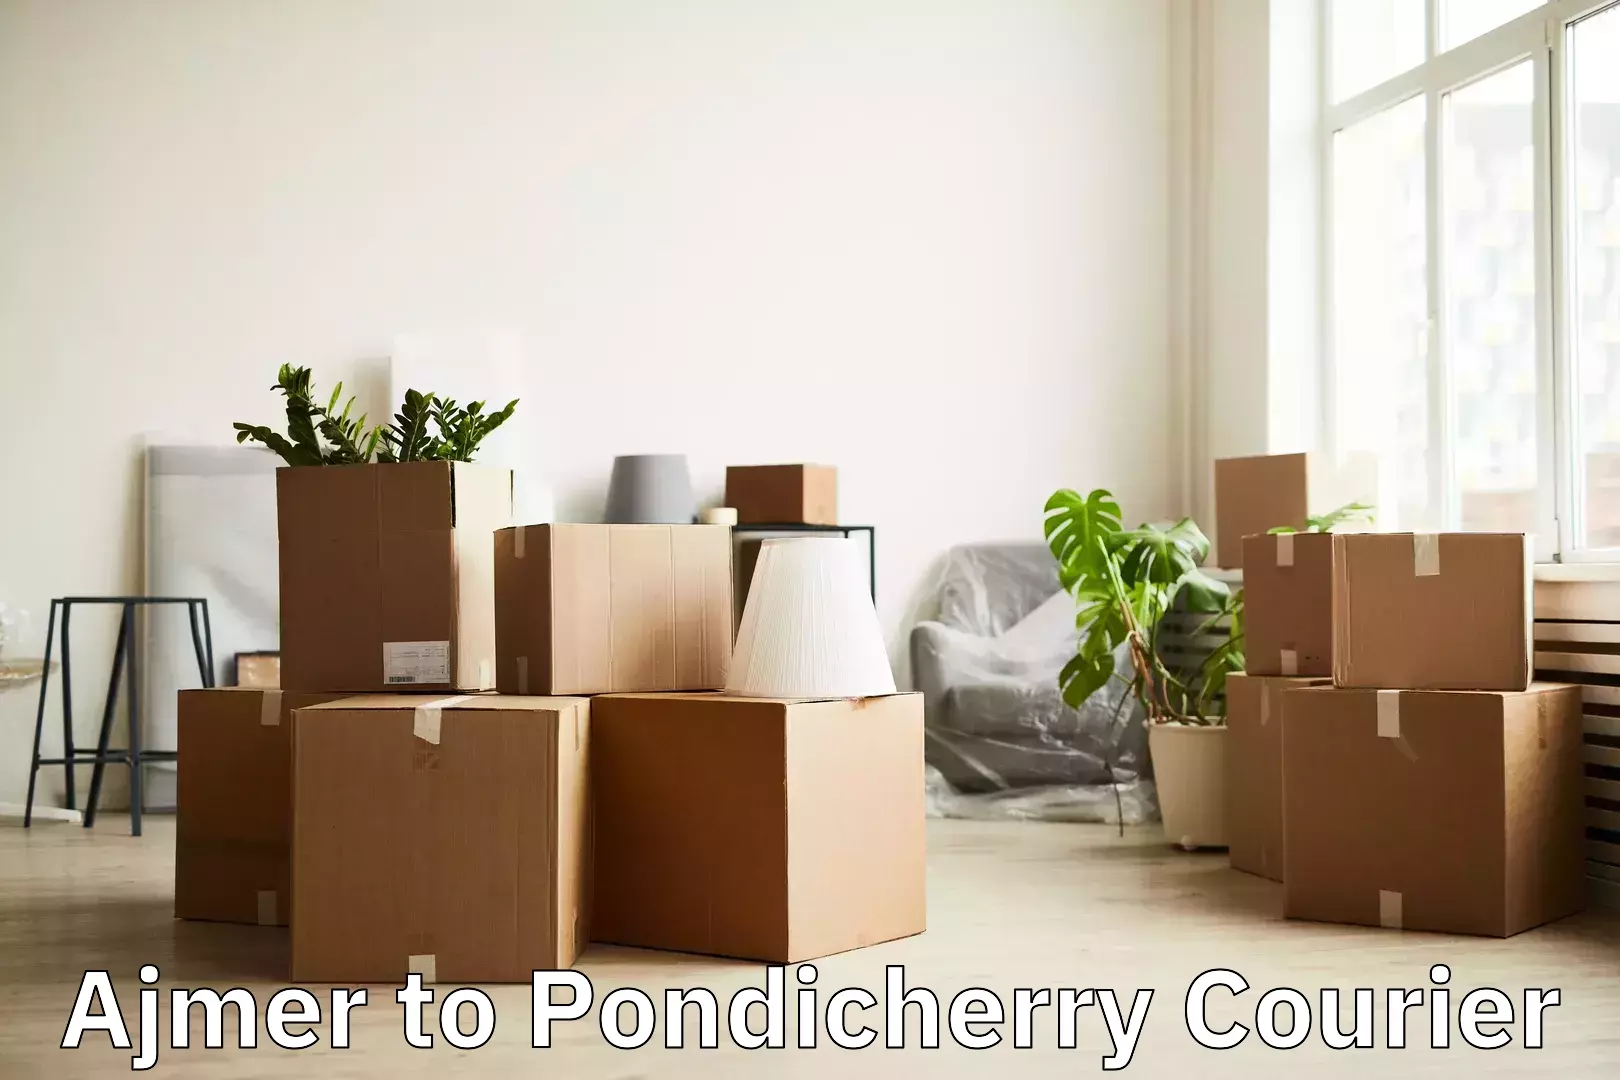 Luggage delivery app Ajmer to Pondicherry